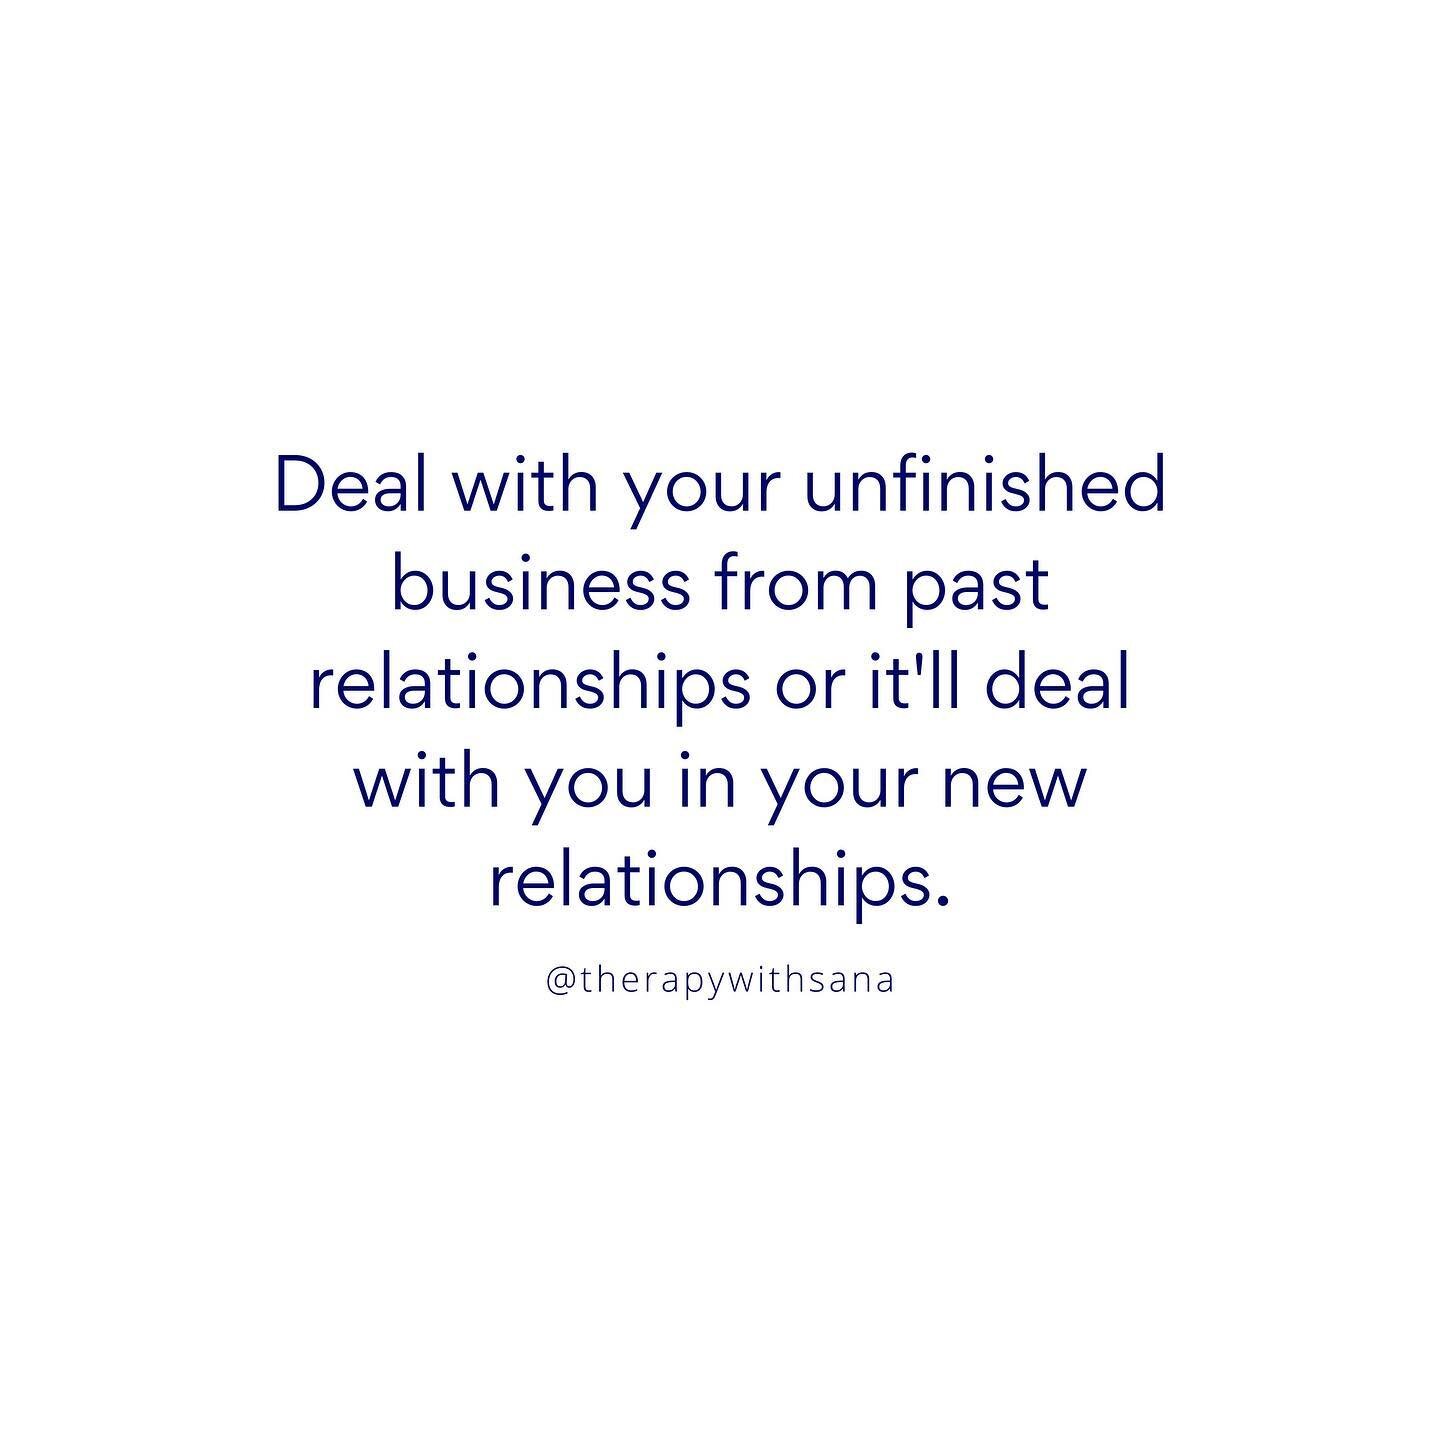 #relationshipgoals #relationshipquotes #therapy #therapist #counseling #counselor #letgo #unfinishedbusiness #healing #relationshipadvice #houston #texas